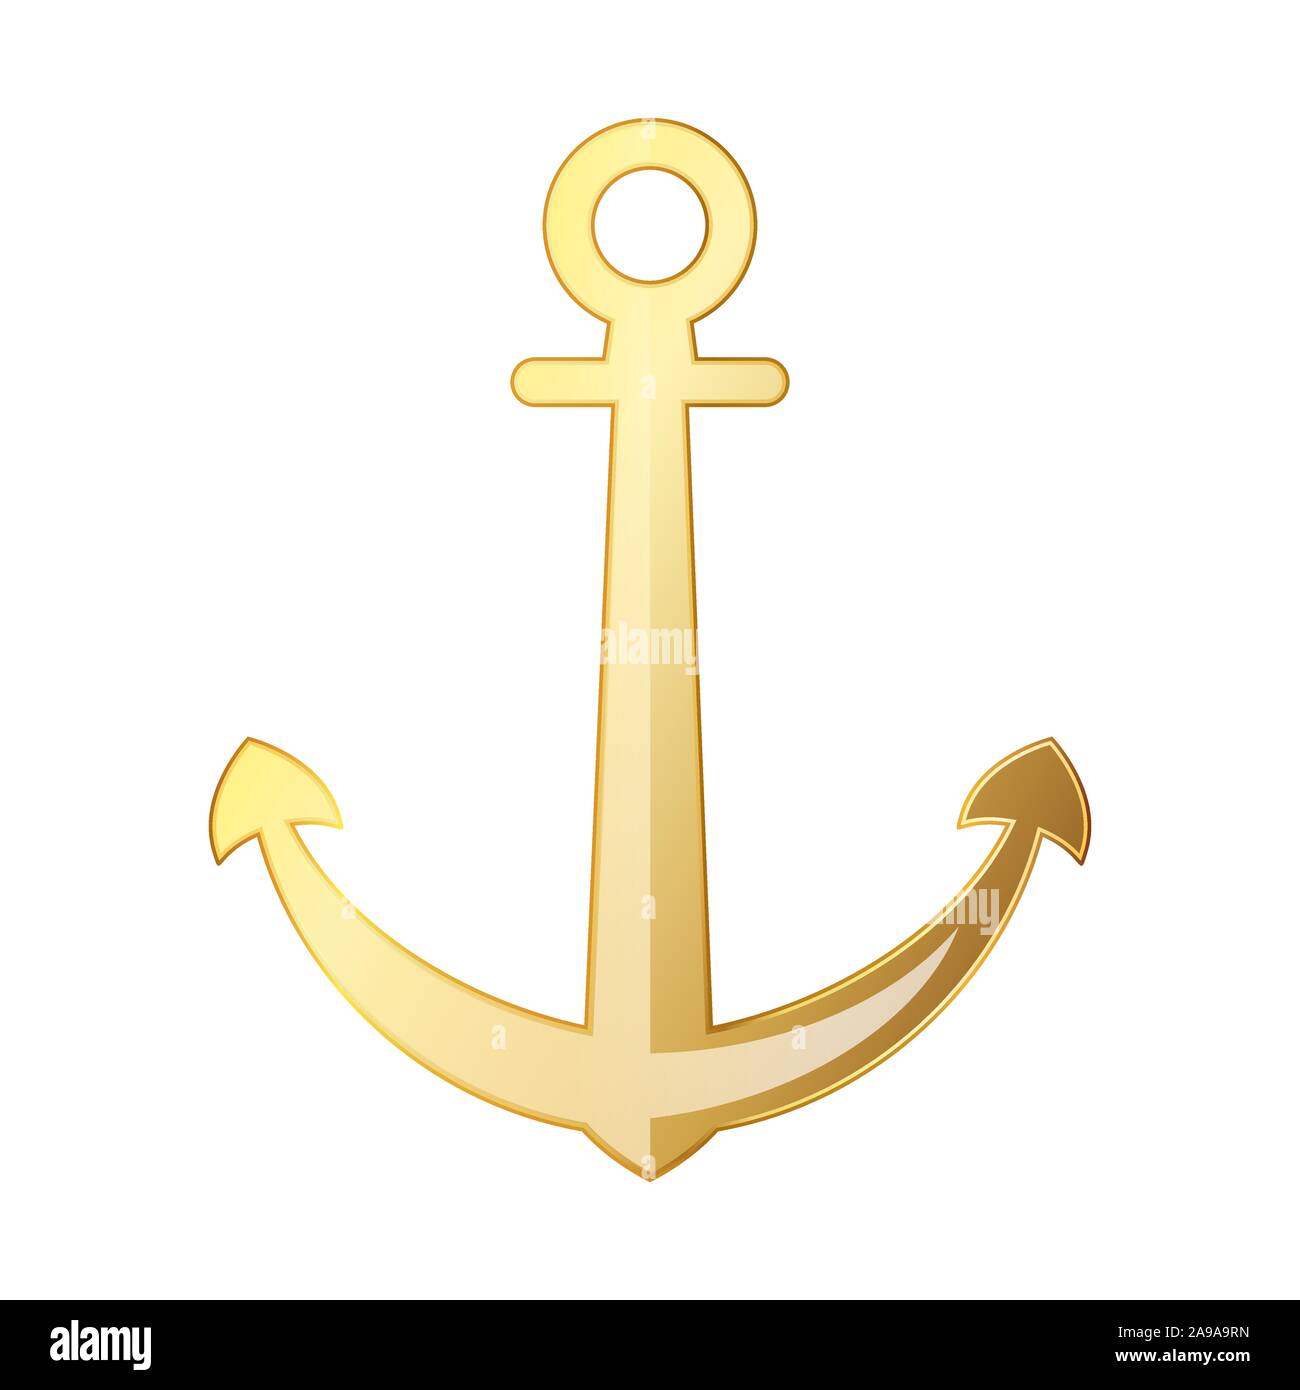 https://c8.alamy.com/comp/2A9A9RN/golden-anchor-icon-isolated-on-white-background-vector-illustration-ship-anchor-2A9A9RN.jpg